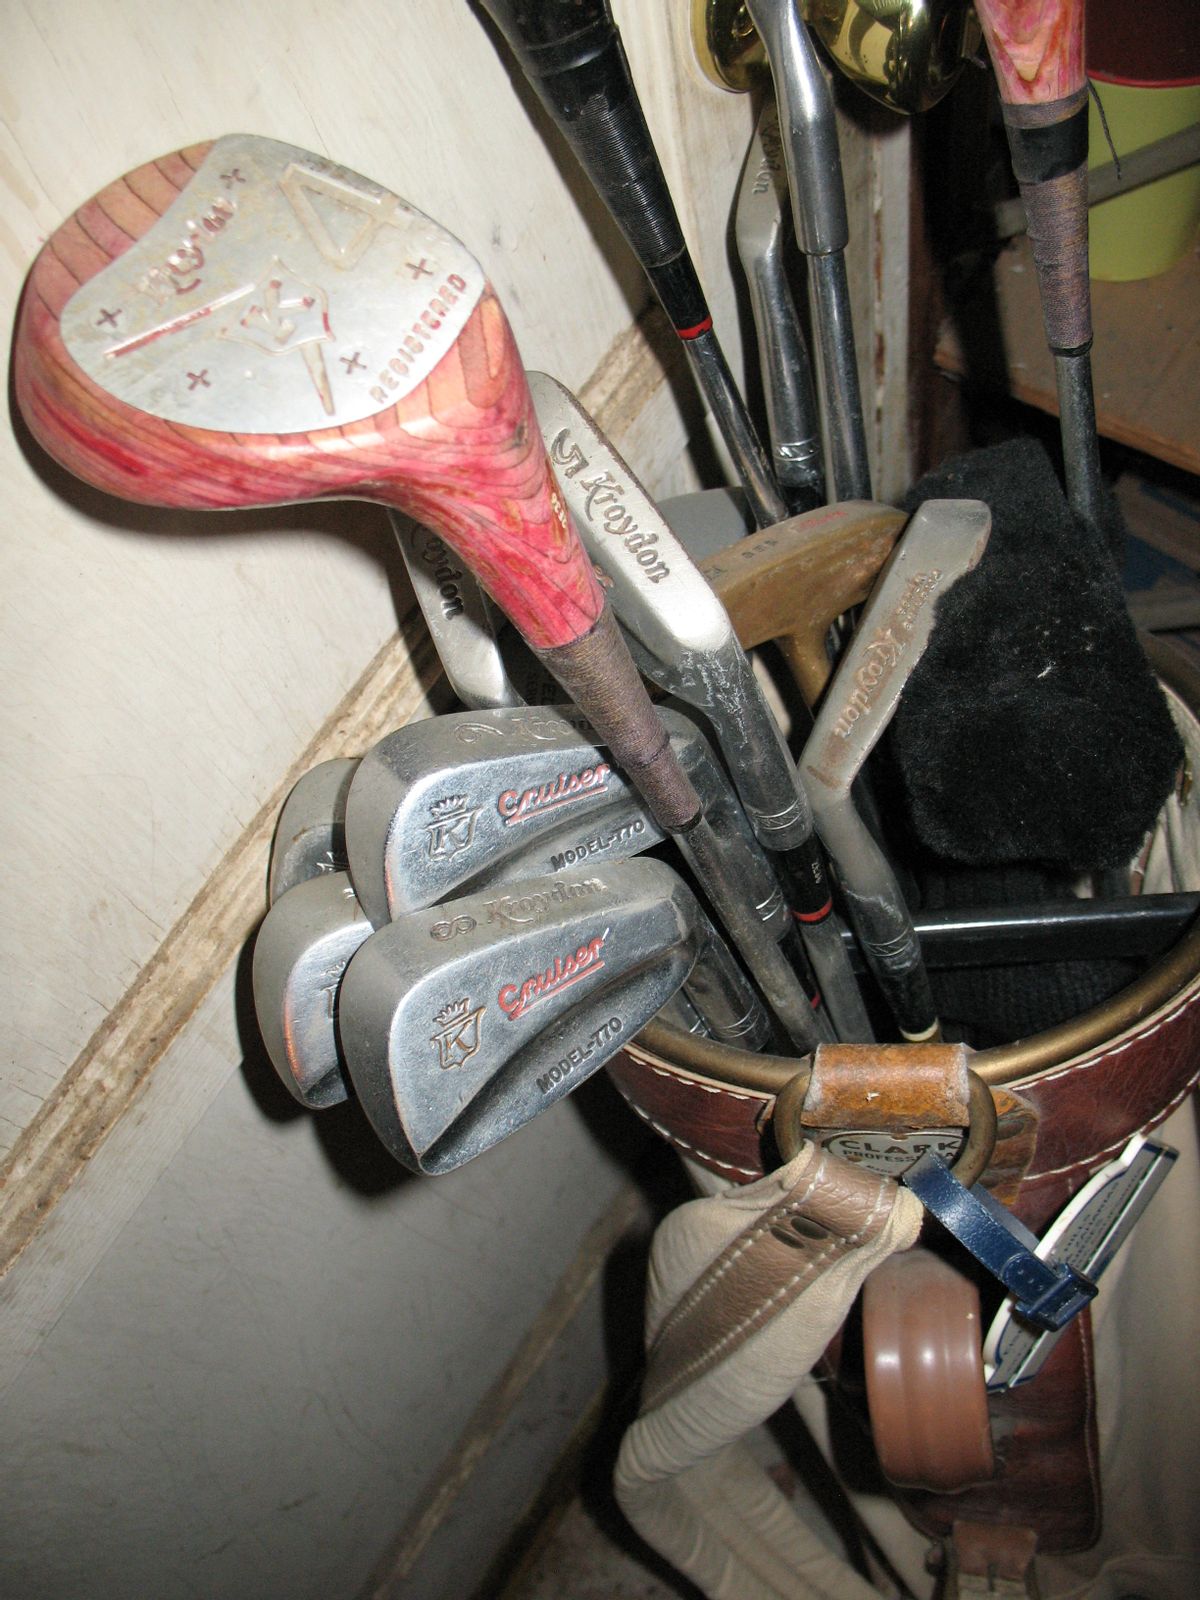 The author's battered golf clubs